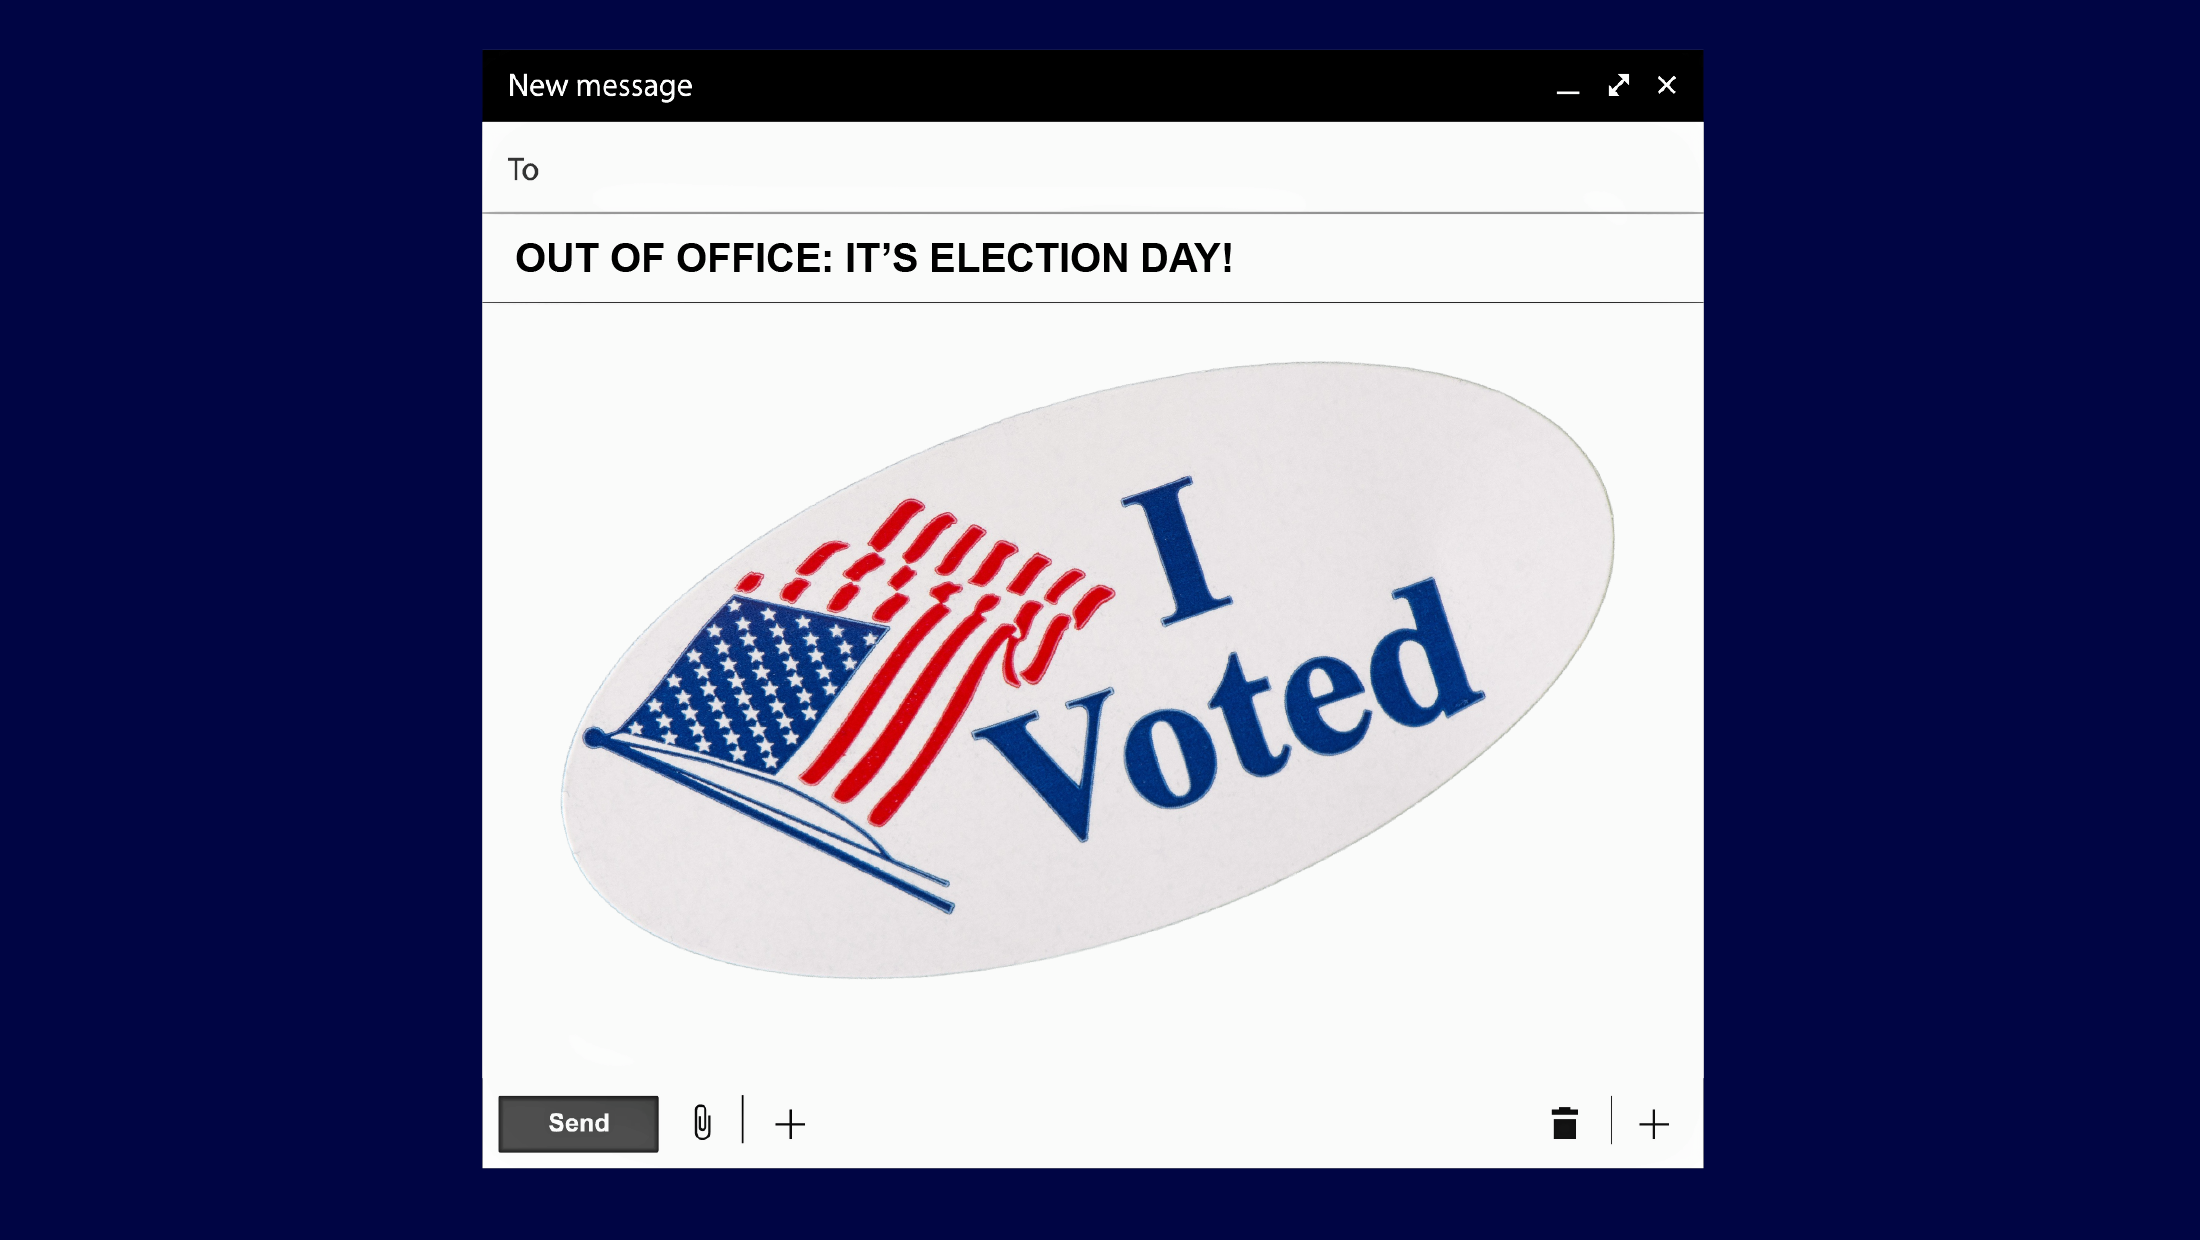 A blank email window with the subject line "OUT OF OFFICE: IT'S ELECTION DAY!" with a large white "I Voted" sticker in the body of the message